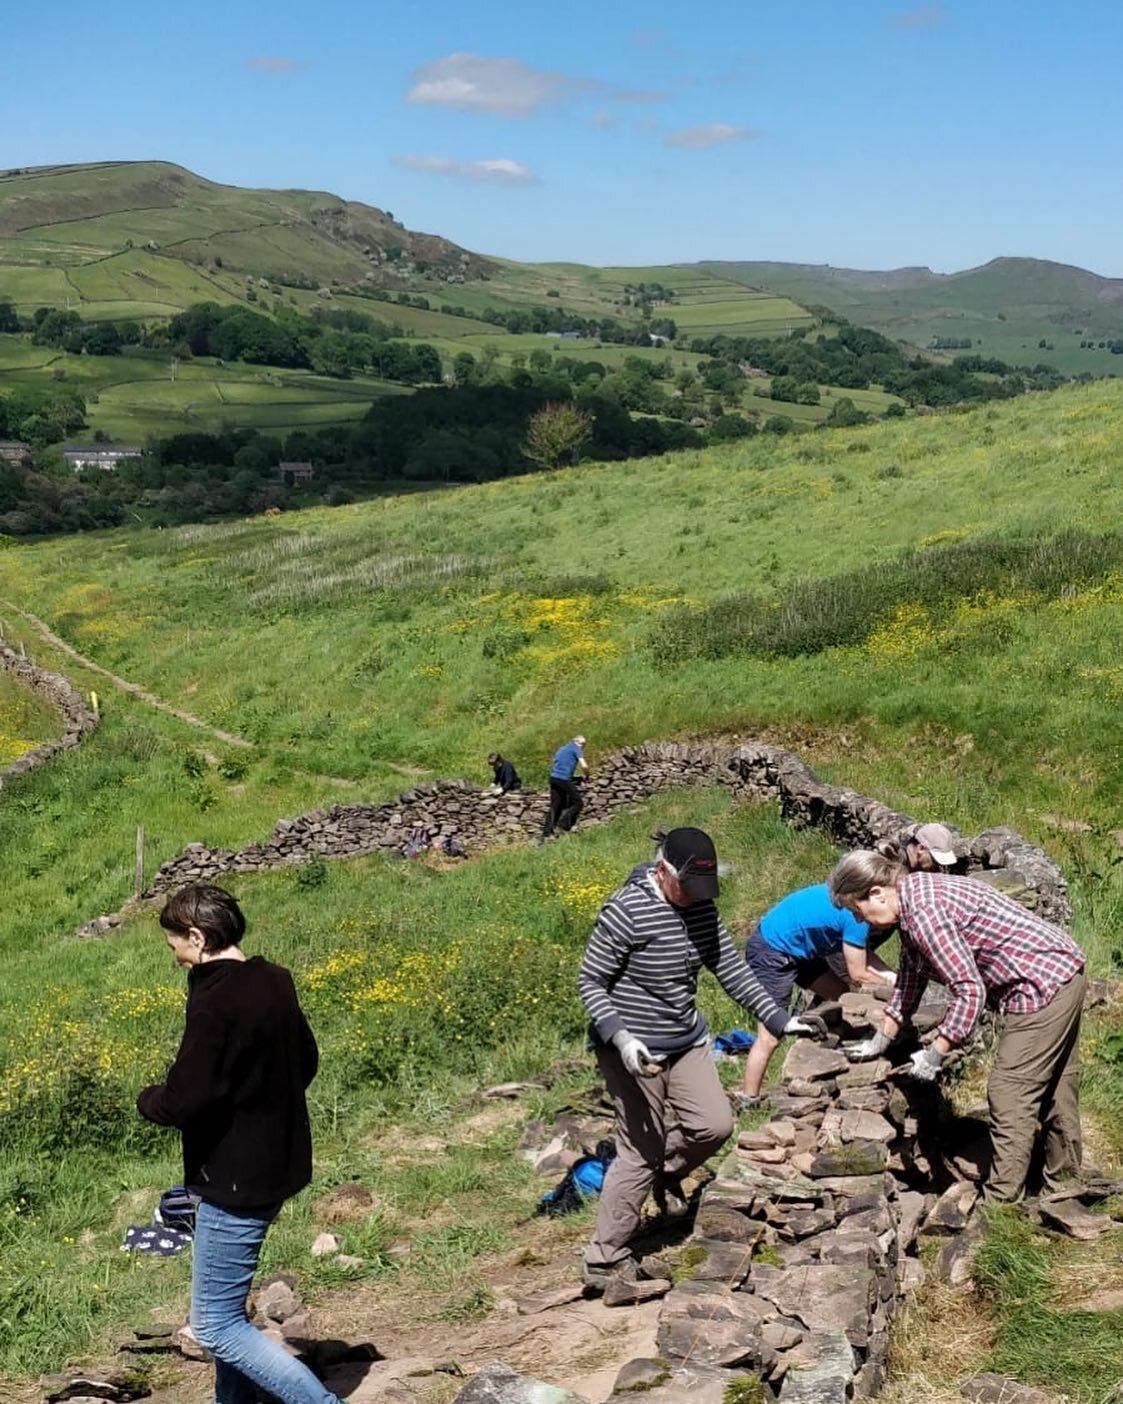 Many thanks to all of those who took part in Connor&rsquo;s dry stone walling tuition this weekend. Fantastic weather and instruction was had by all. Such events are great ways at marrying together a mixture of skills-training, camaraderie, and farmi